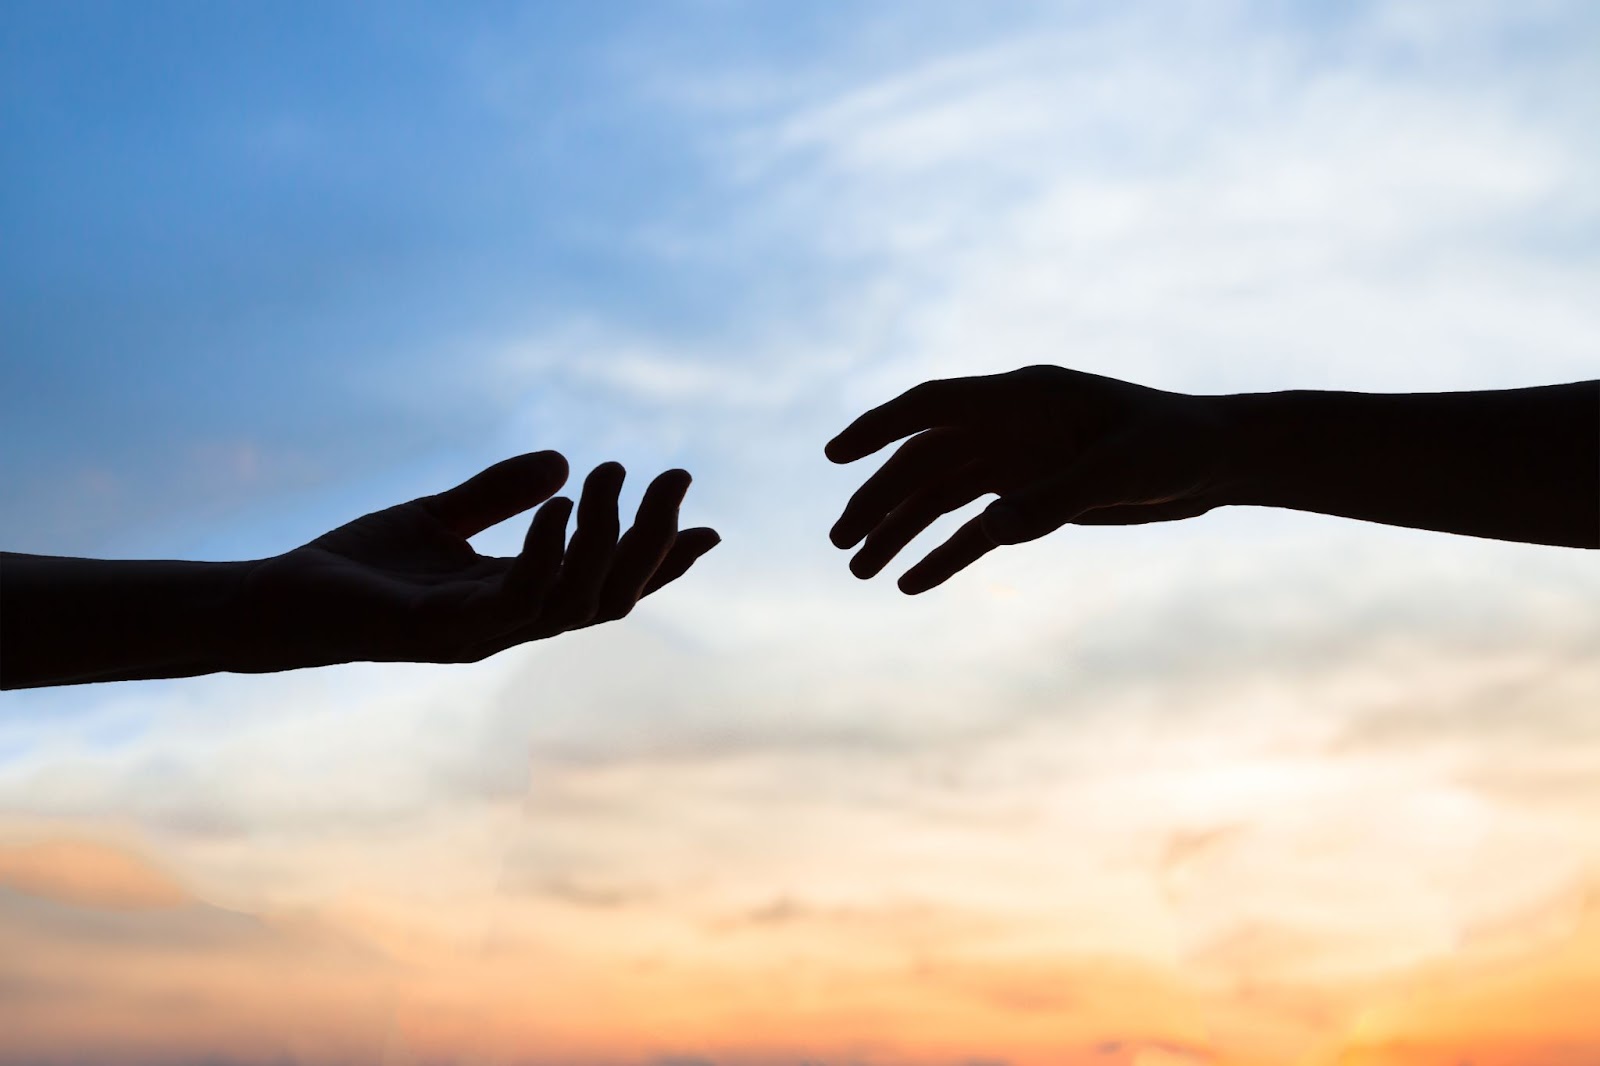 Hands reaching out to help each other